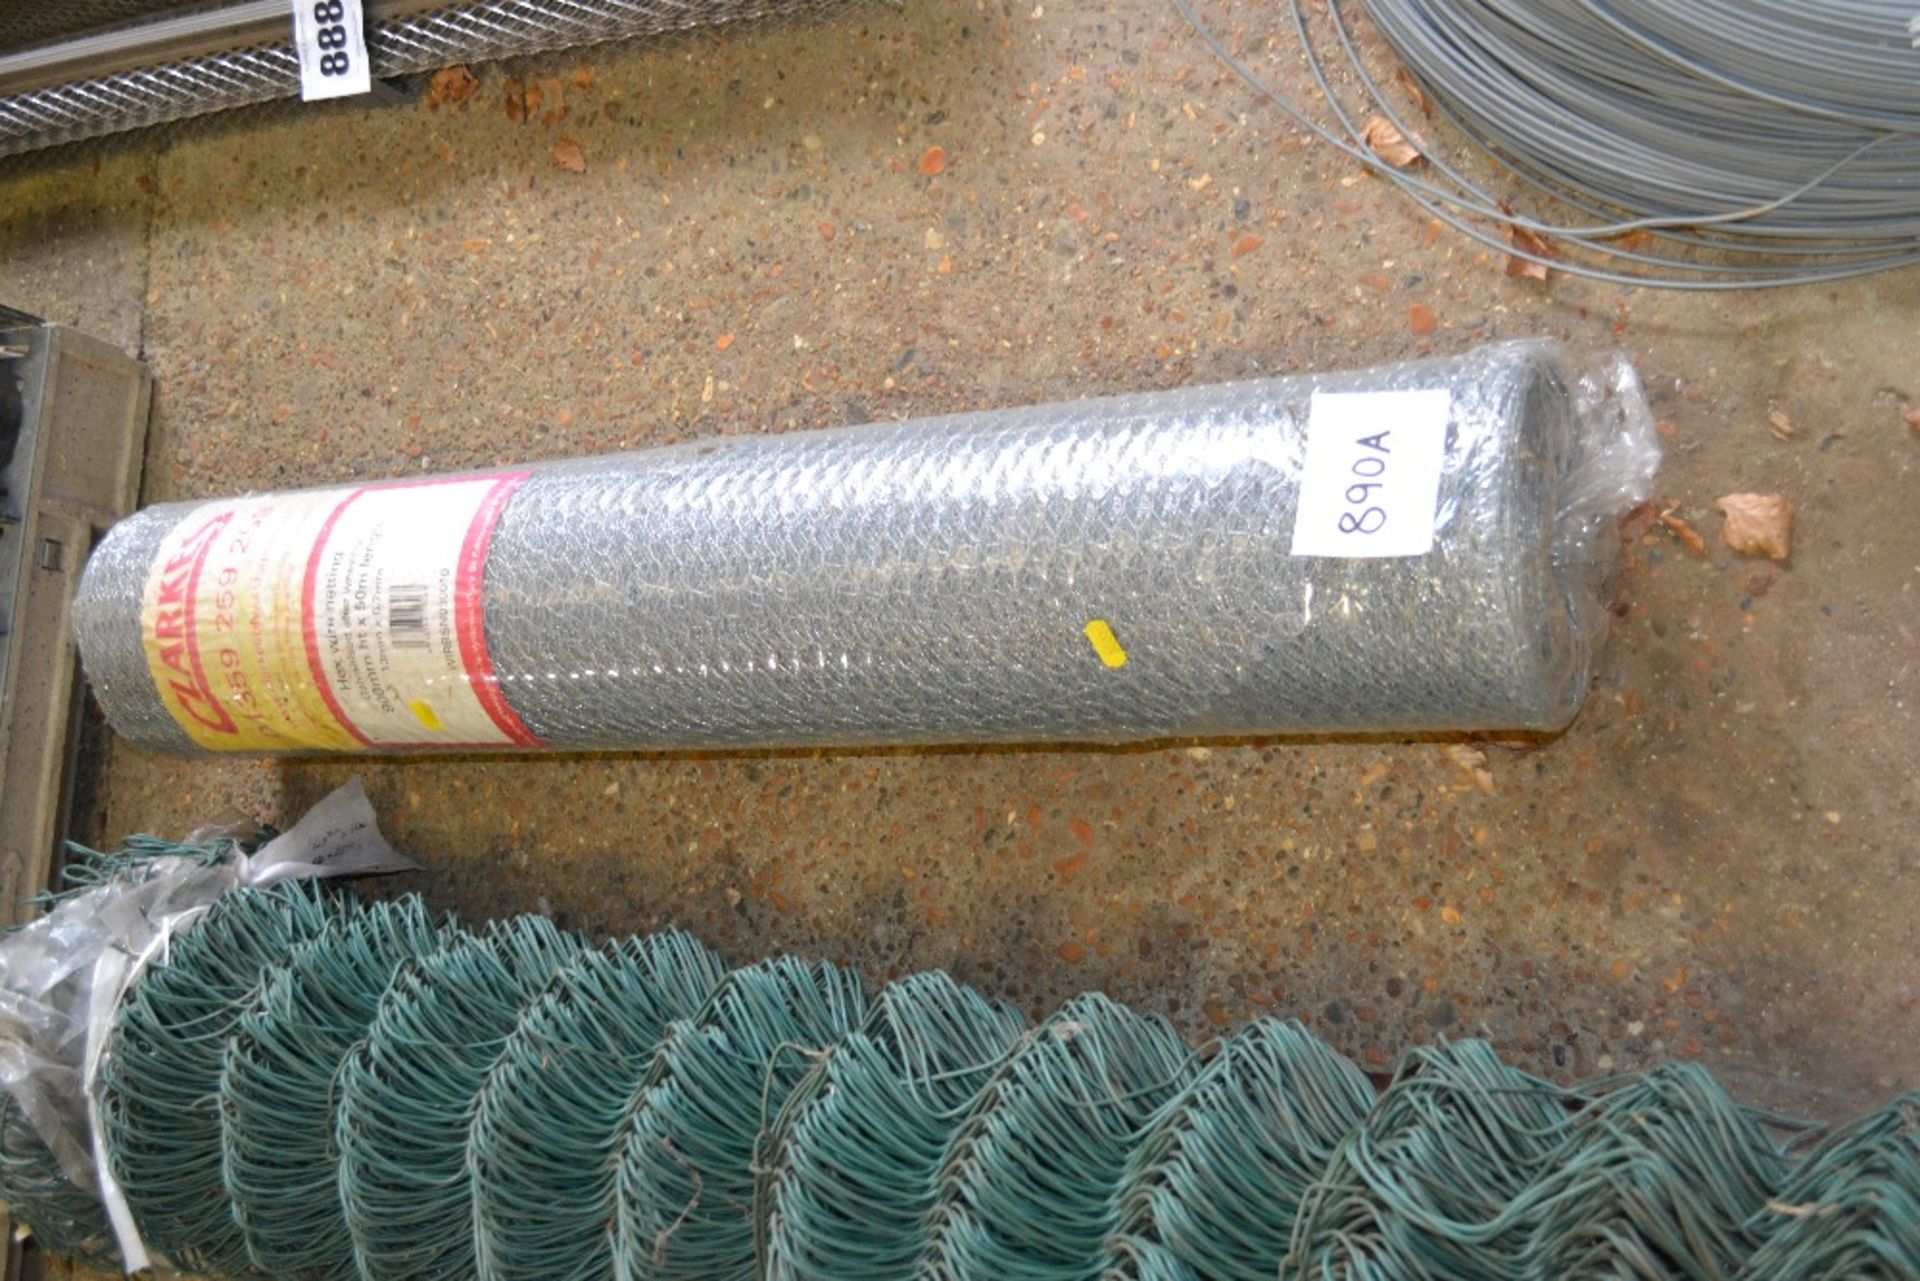 50m x 80cm wire netting. - Image 2 of 2